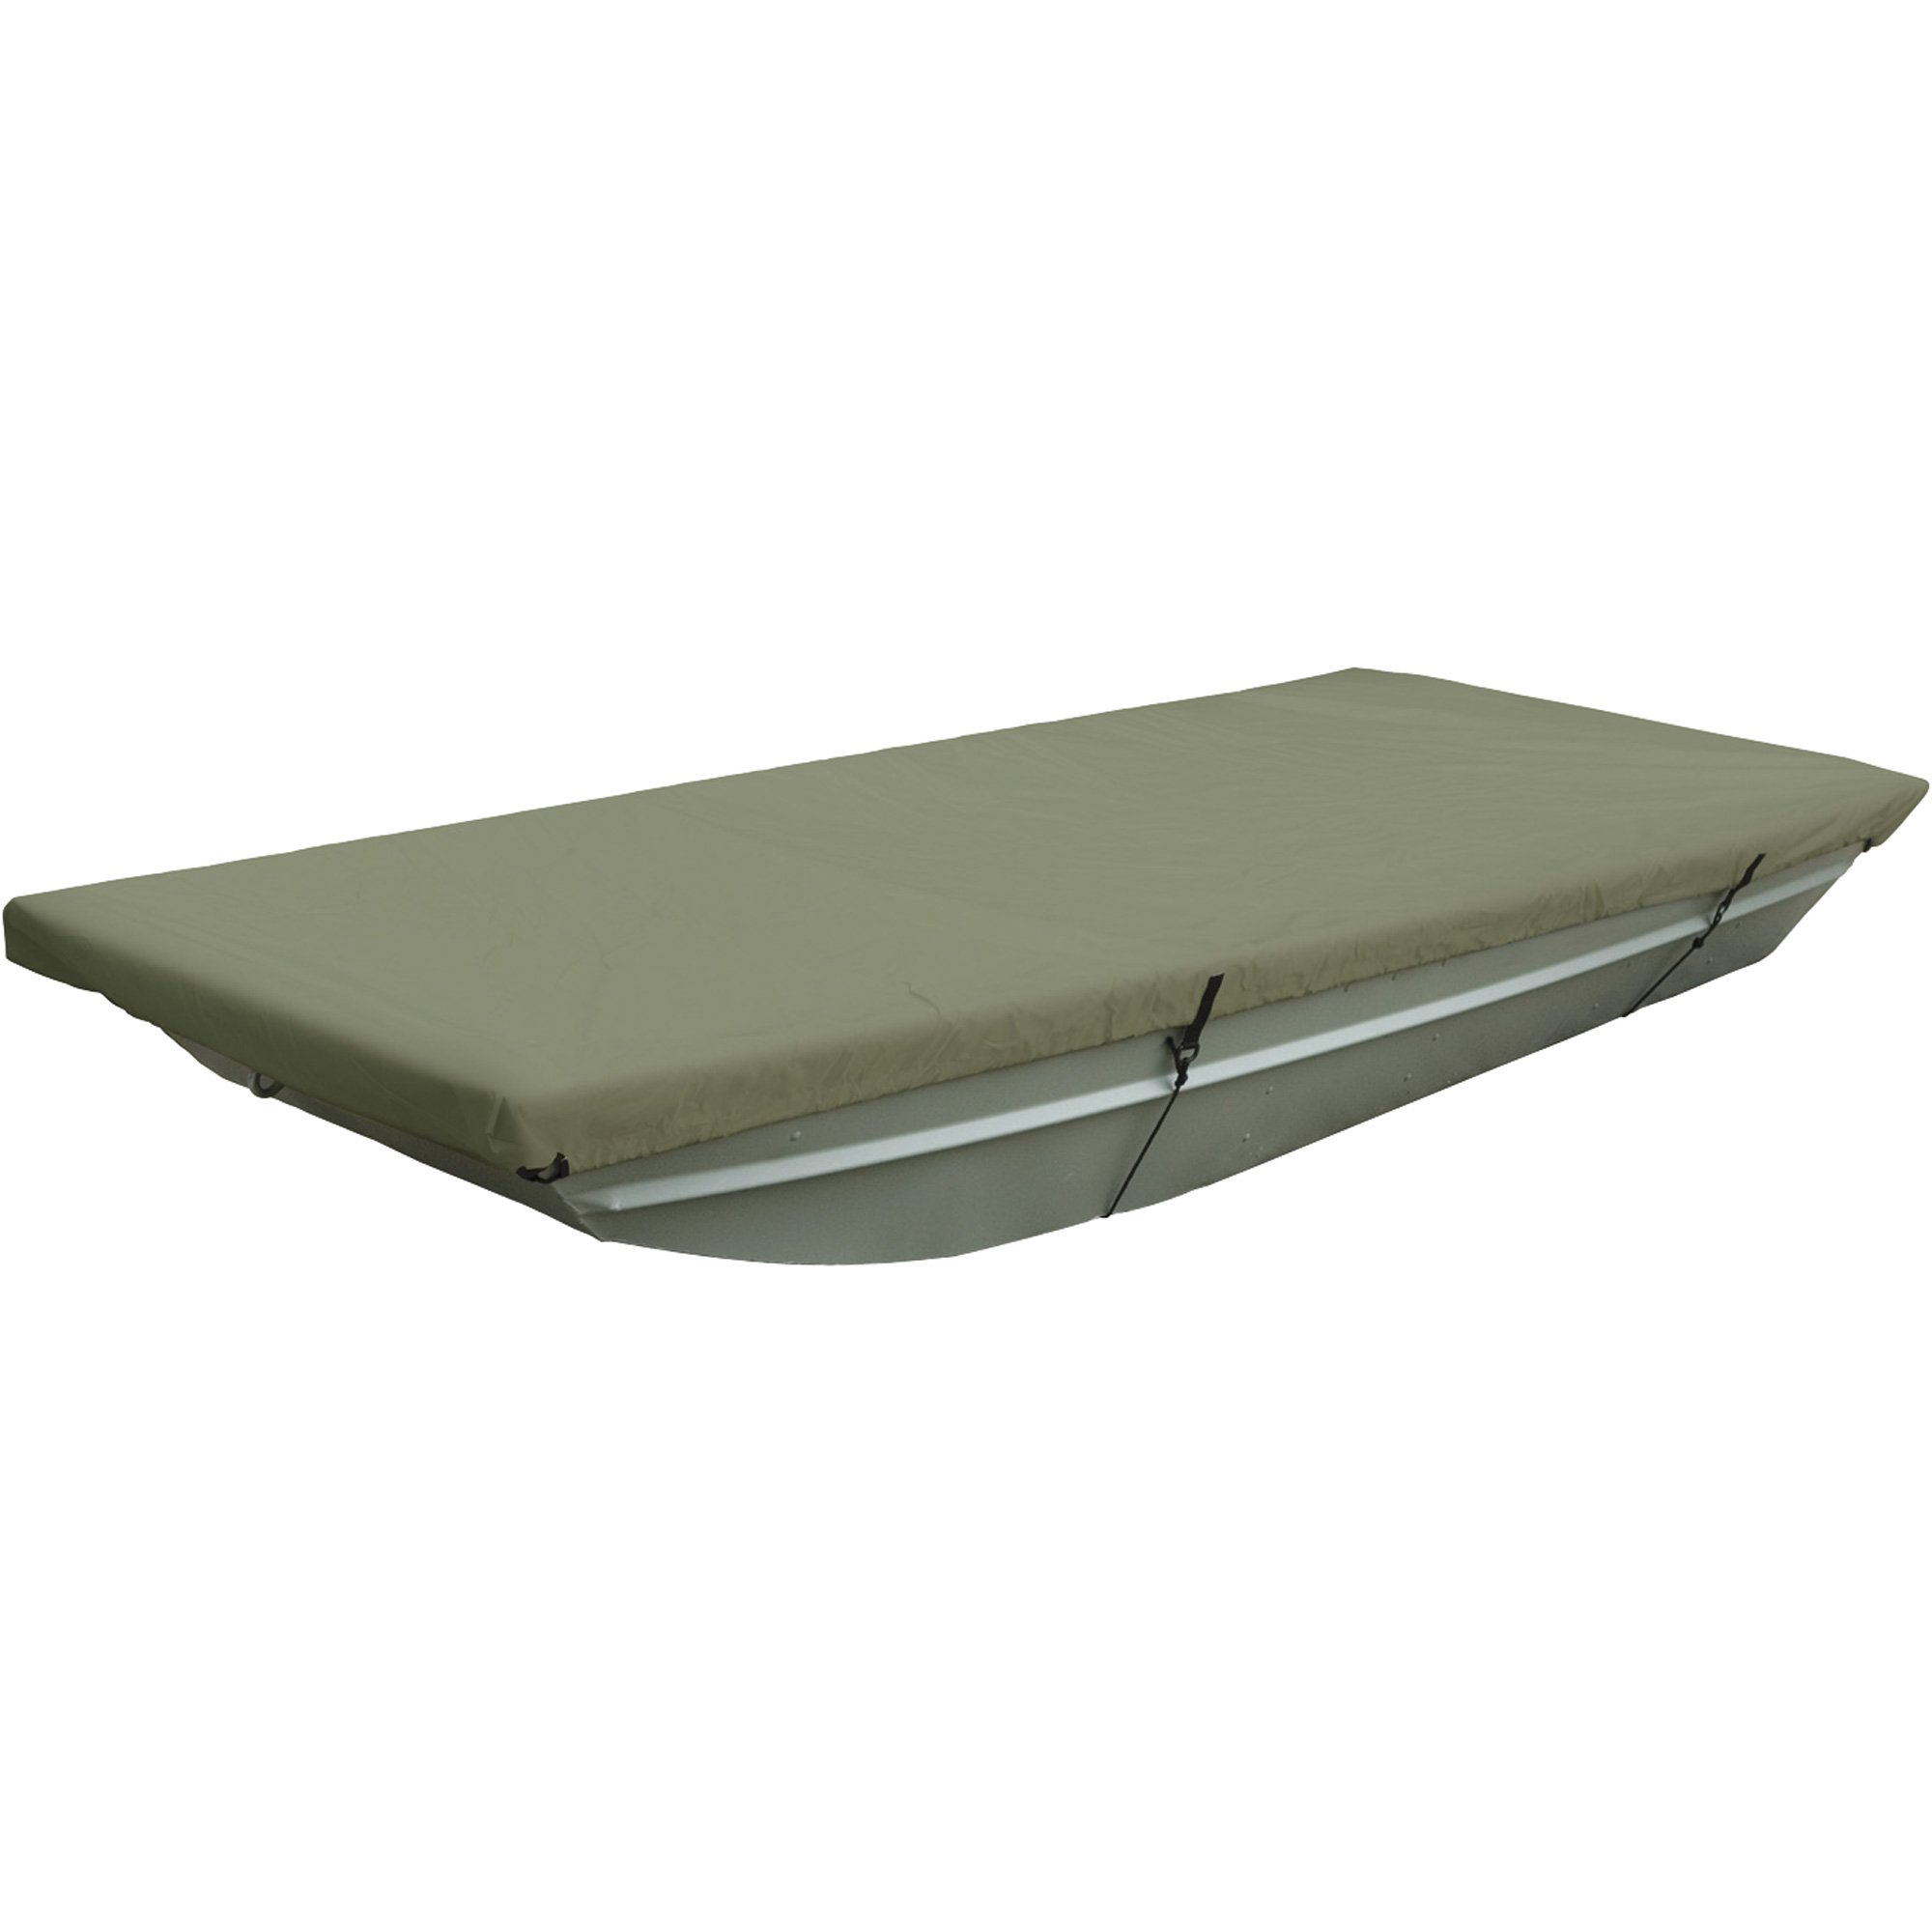 Classic Accessories Jon Boat Cover — Up to 12Ft., Olive, Model# 83030